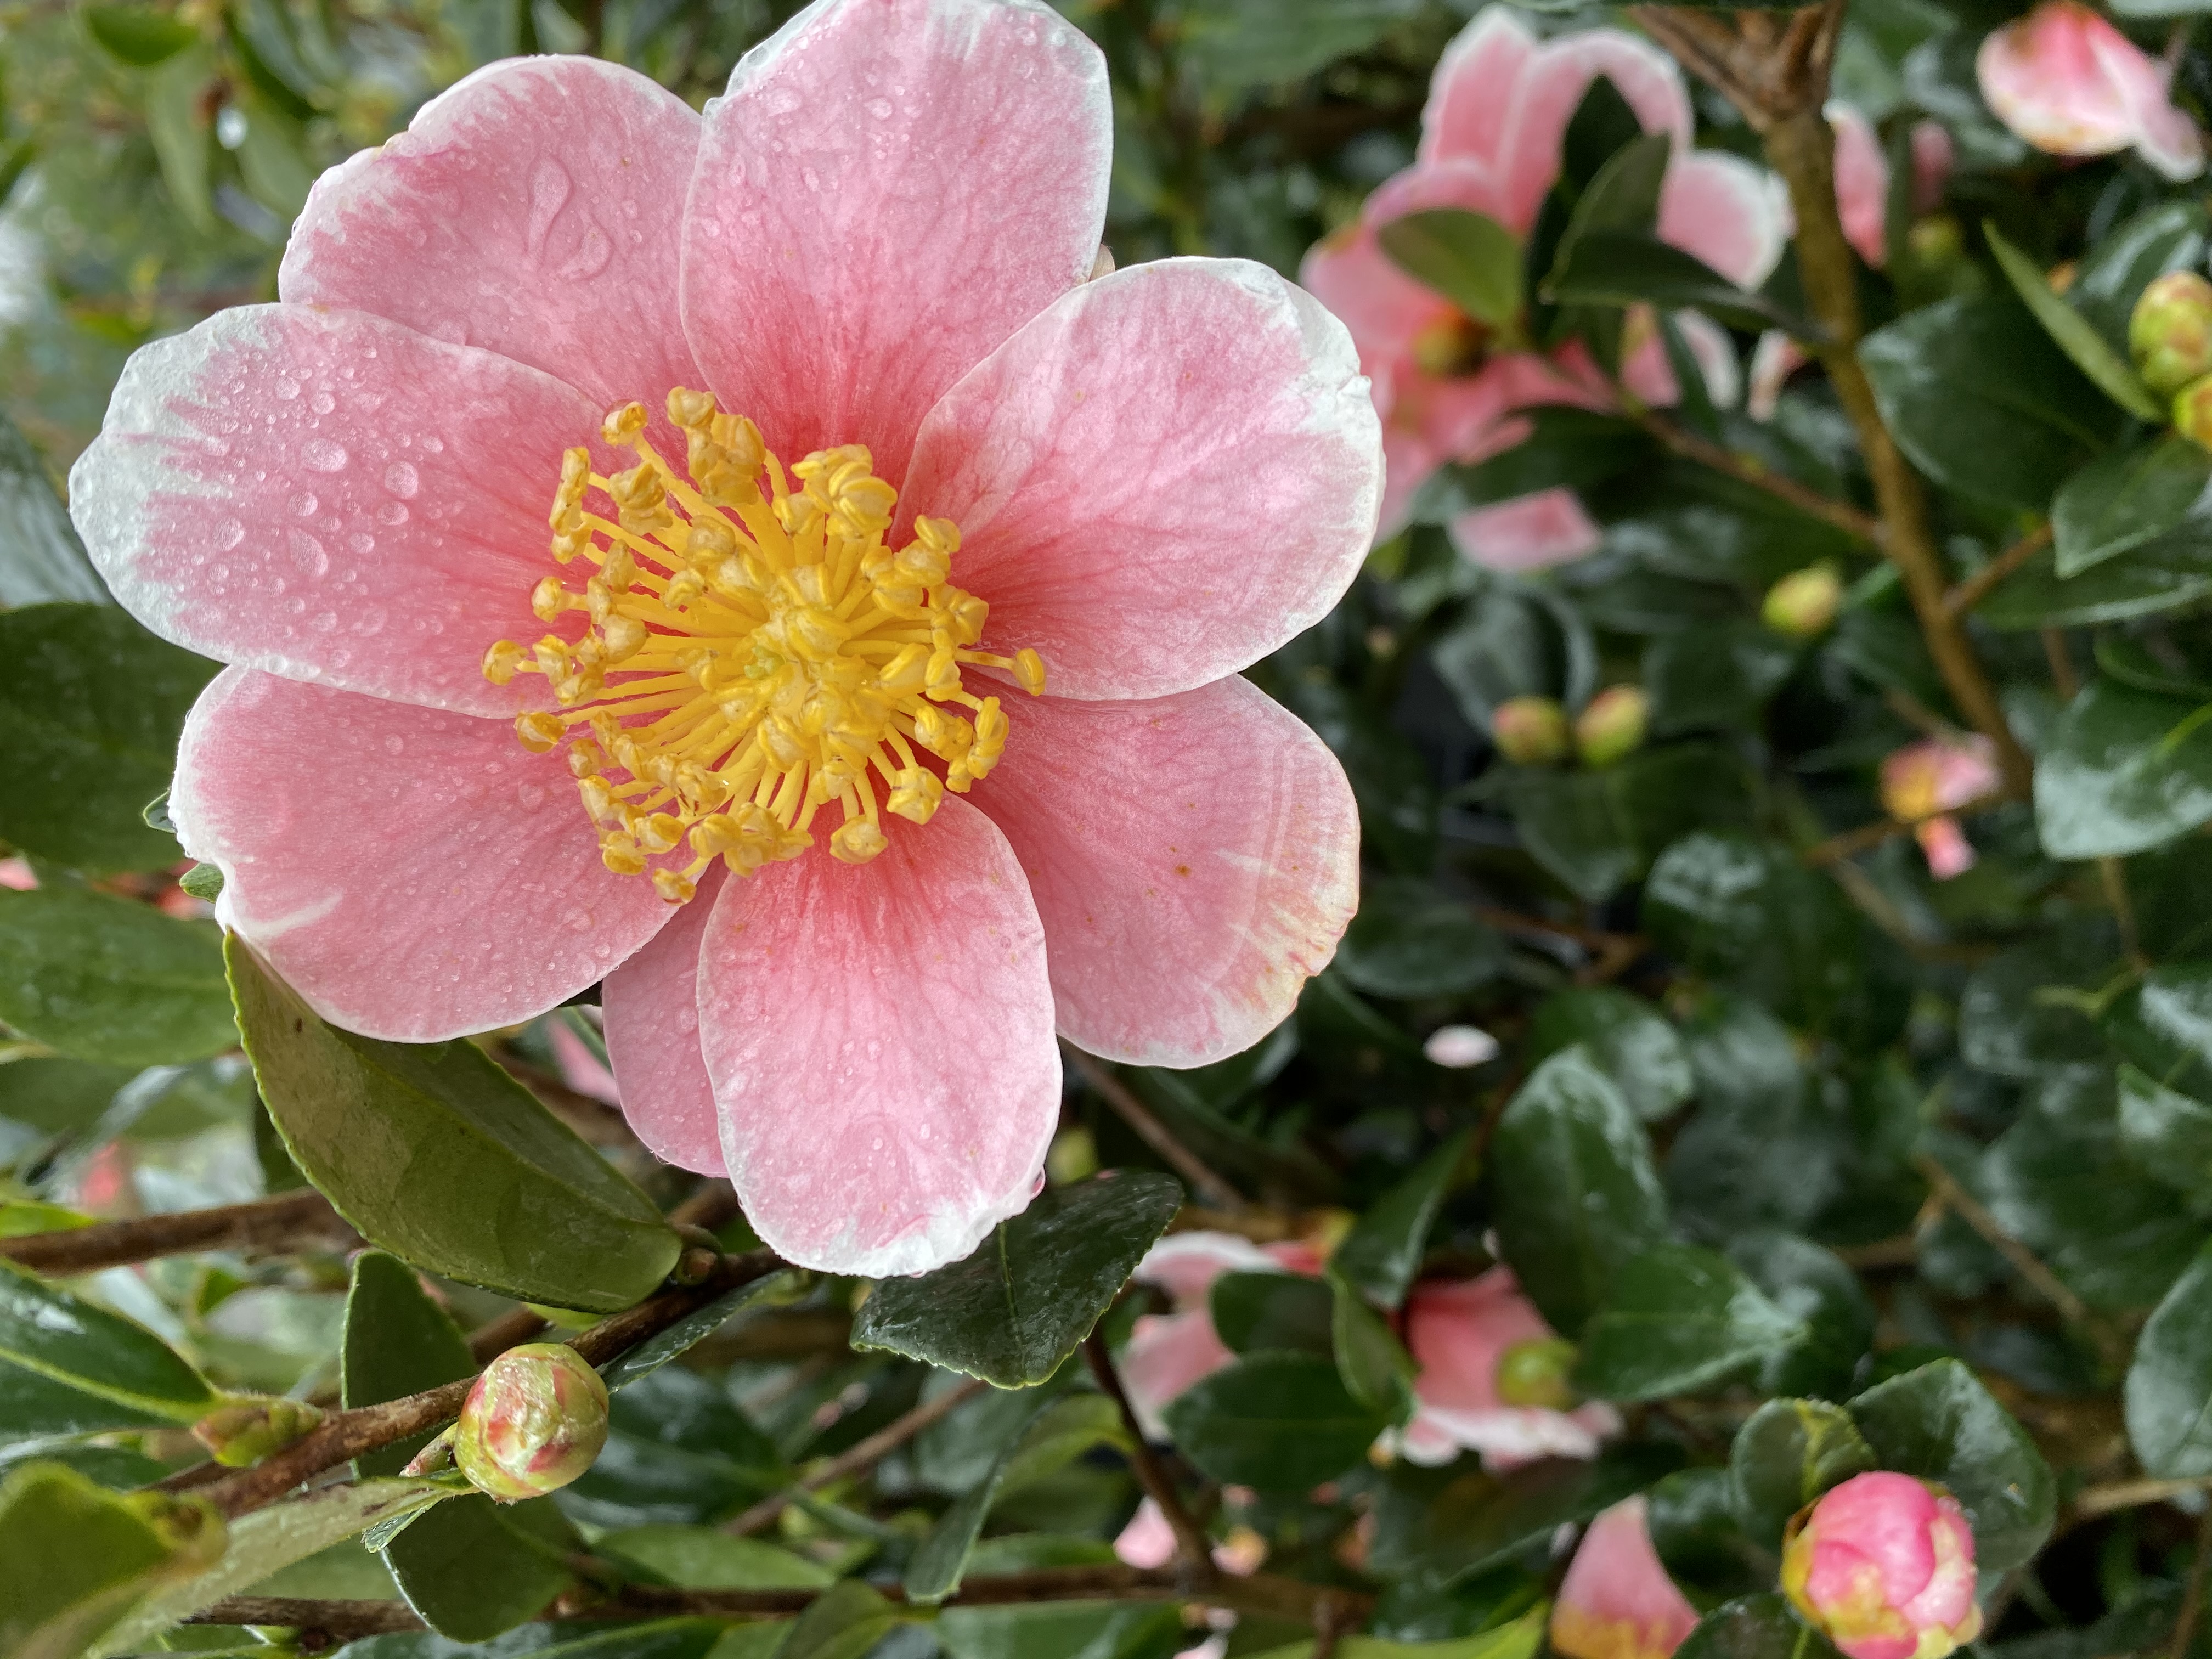 This camellia's has large pink petals and a bright yellow center.